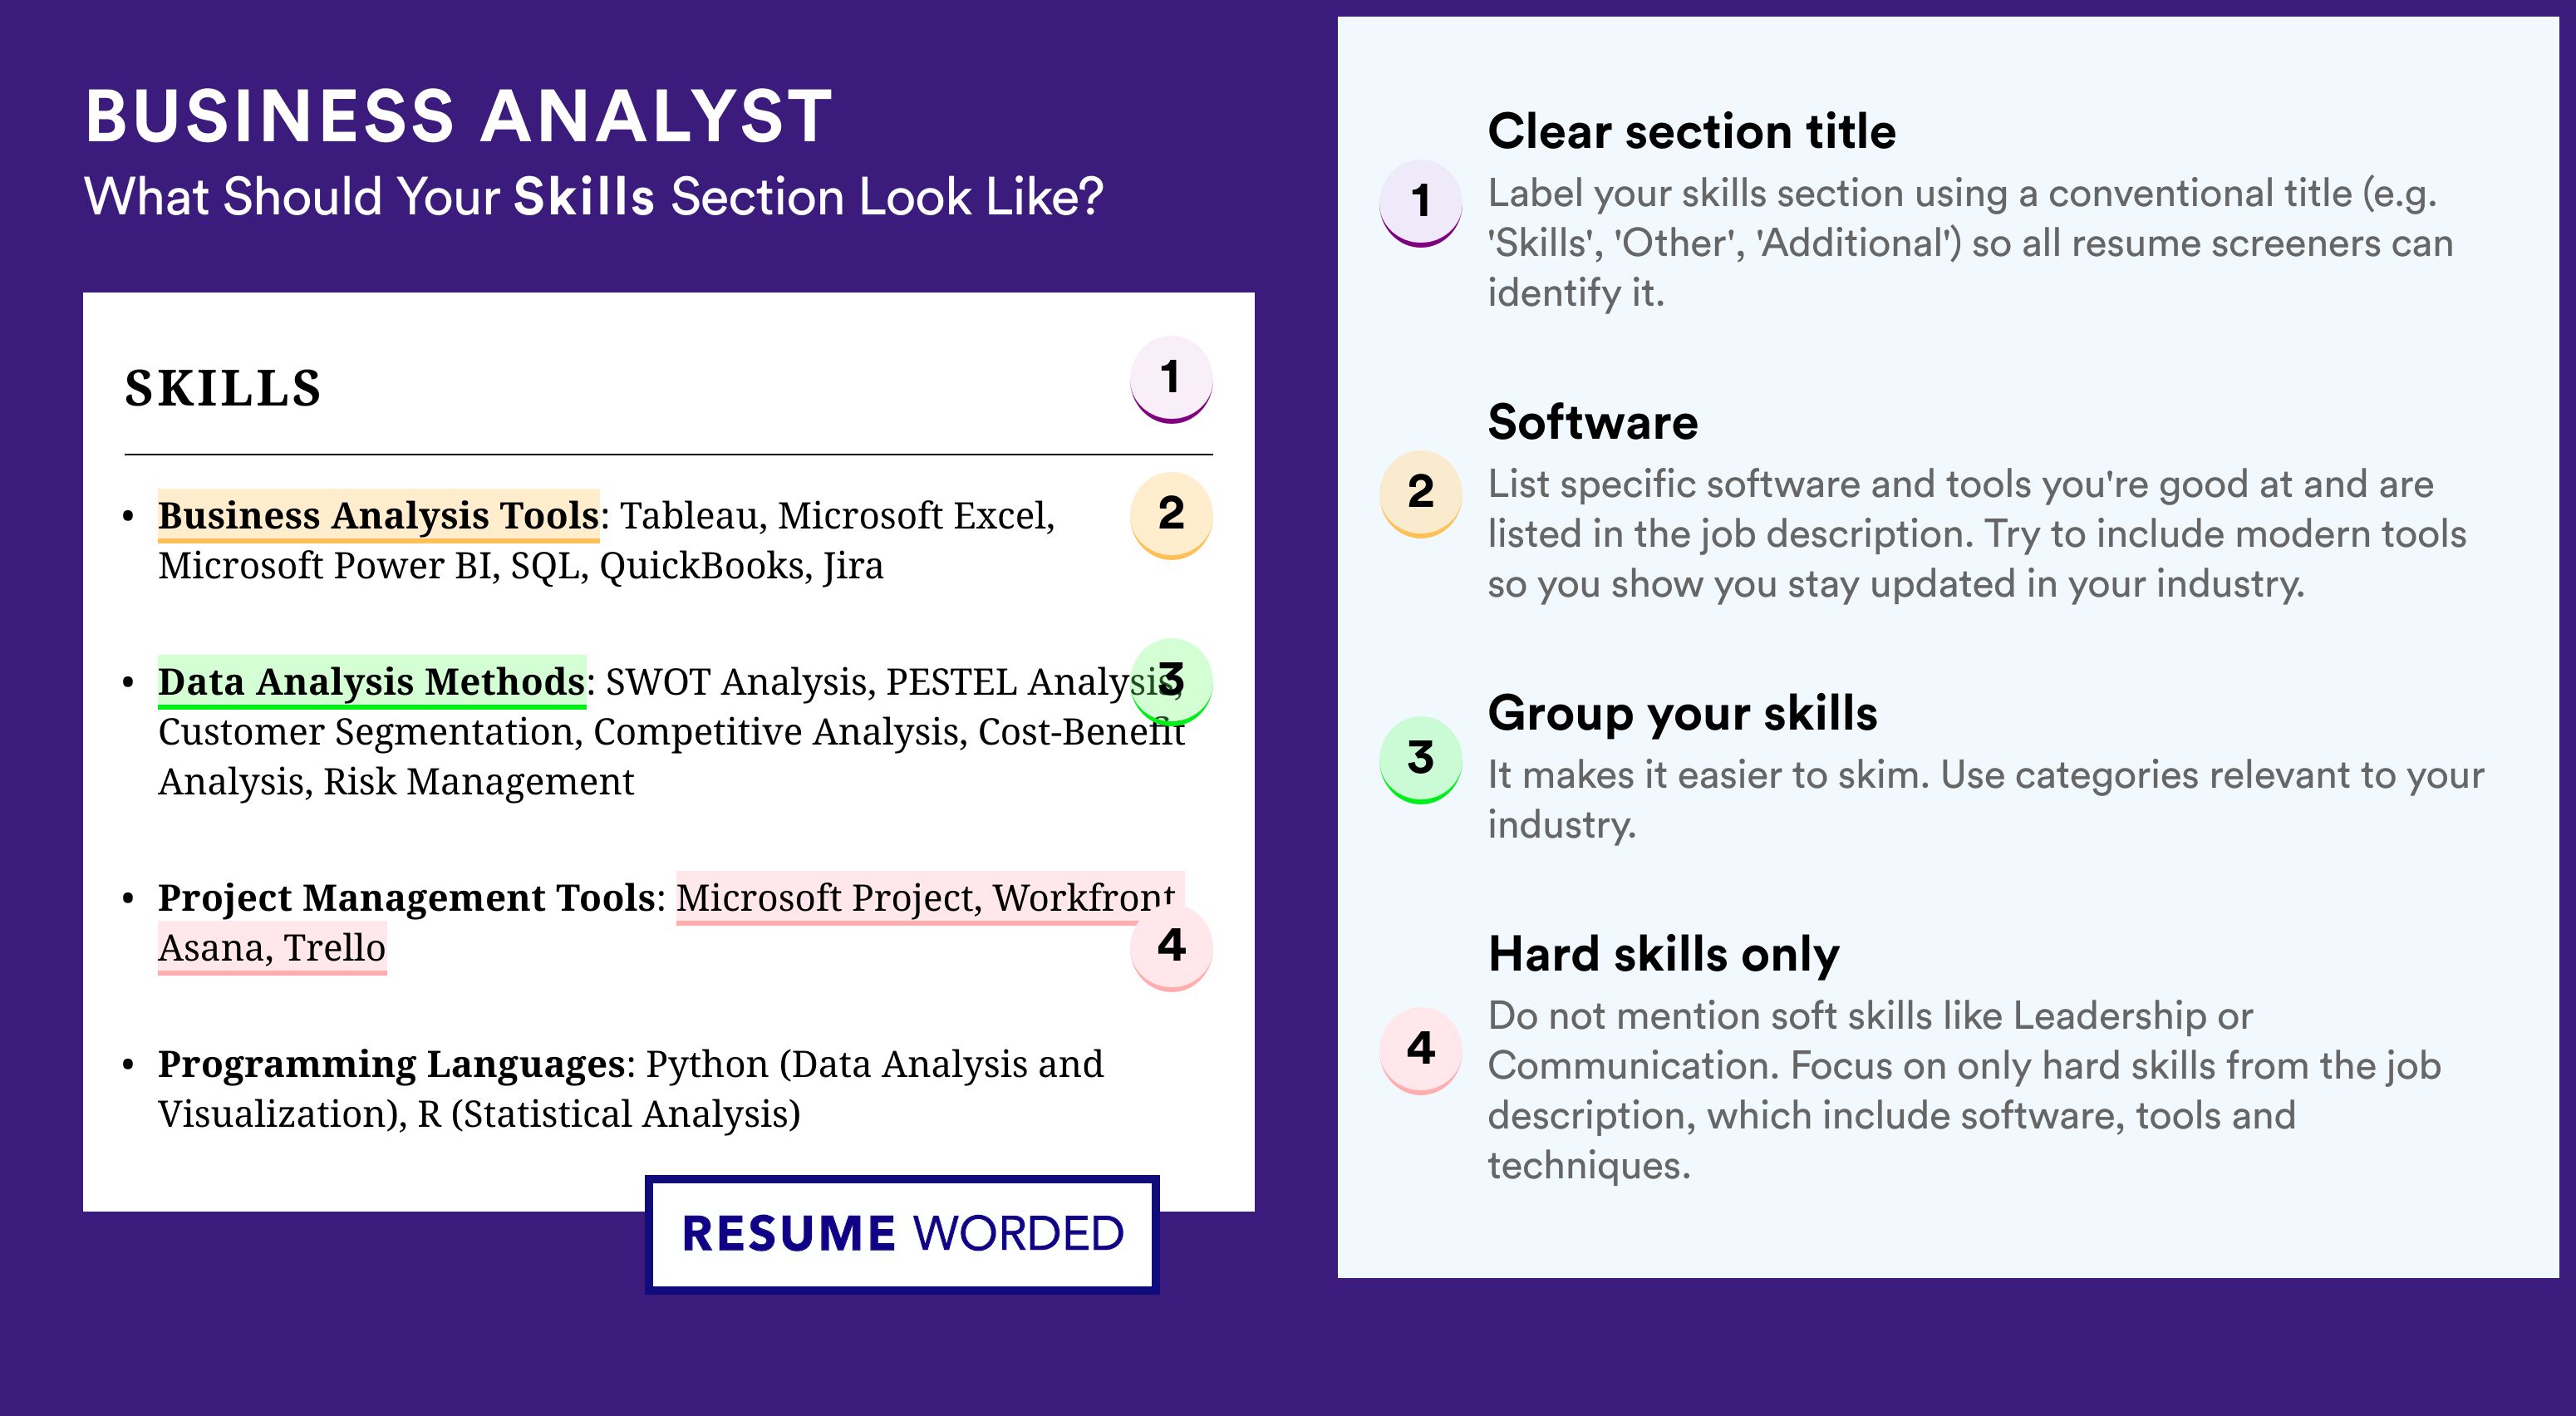 How To Write Your Skills Section - Business Analyst Roles